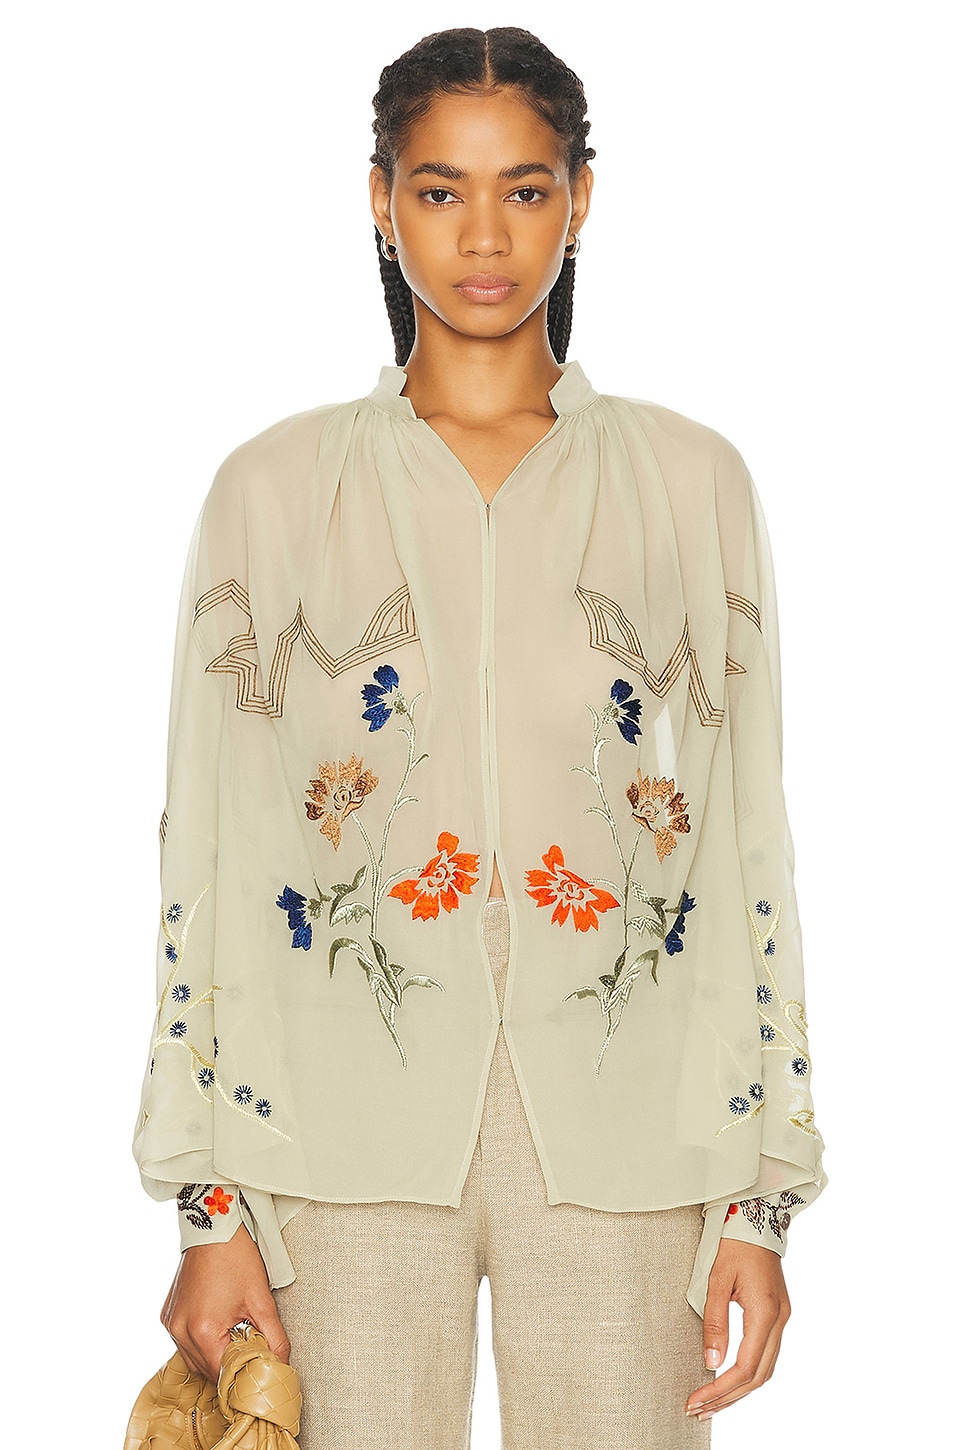 Embroidered Flower Study Shirt in Cream